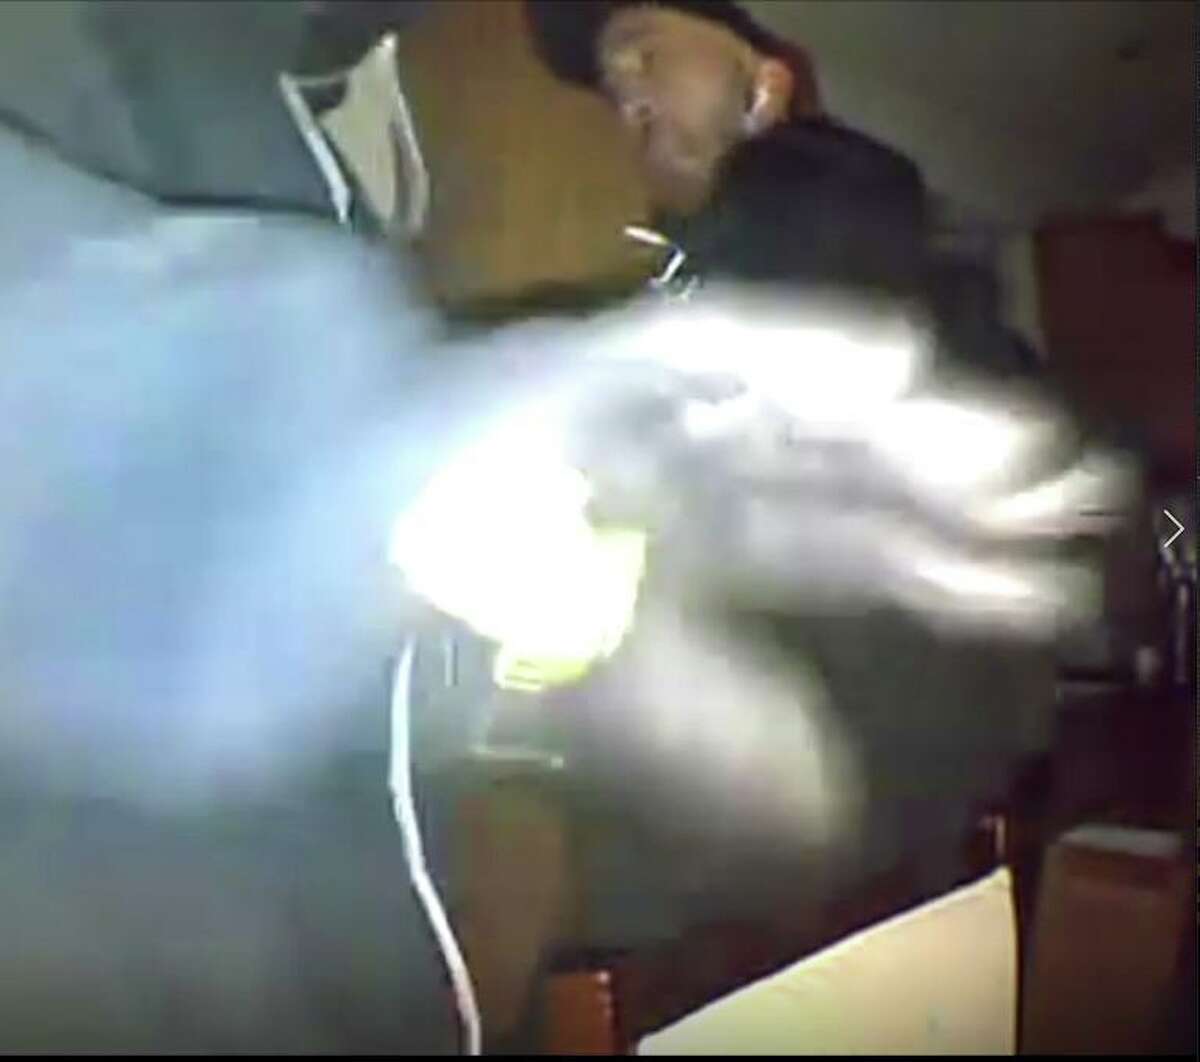 Naugatuck police are trying to identify these two individuals suspected of carrying out a burglary the evening of Dec. 3, 2021. Police said the homeowner was not home during the break-in, and learned about it from a home surveillance system.